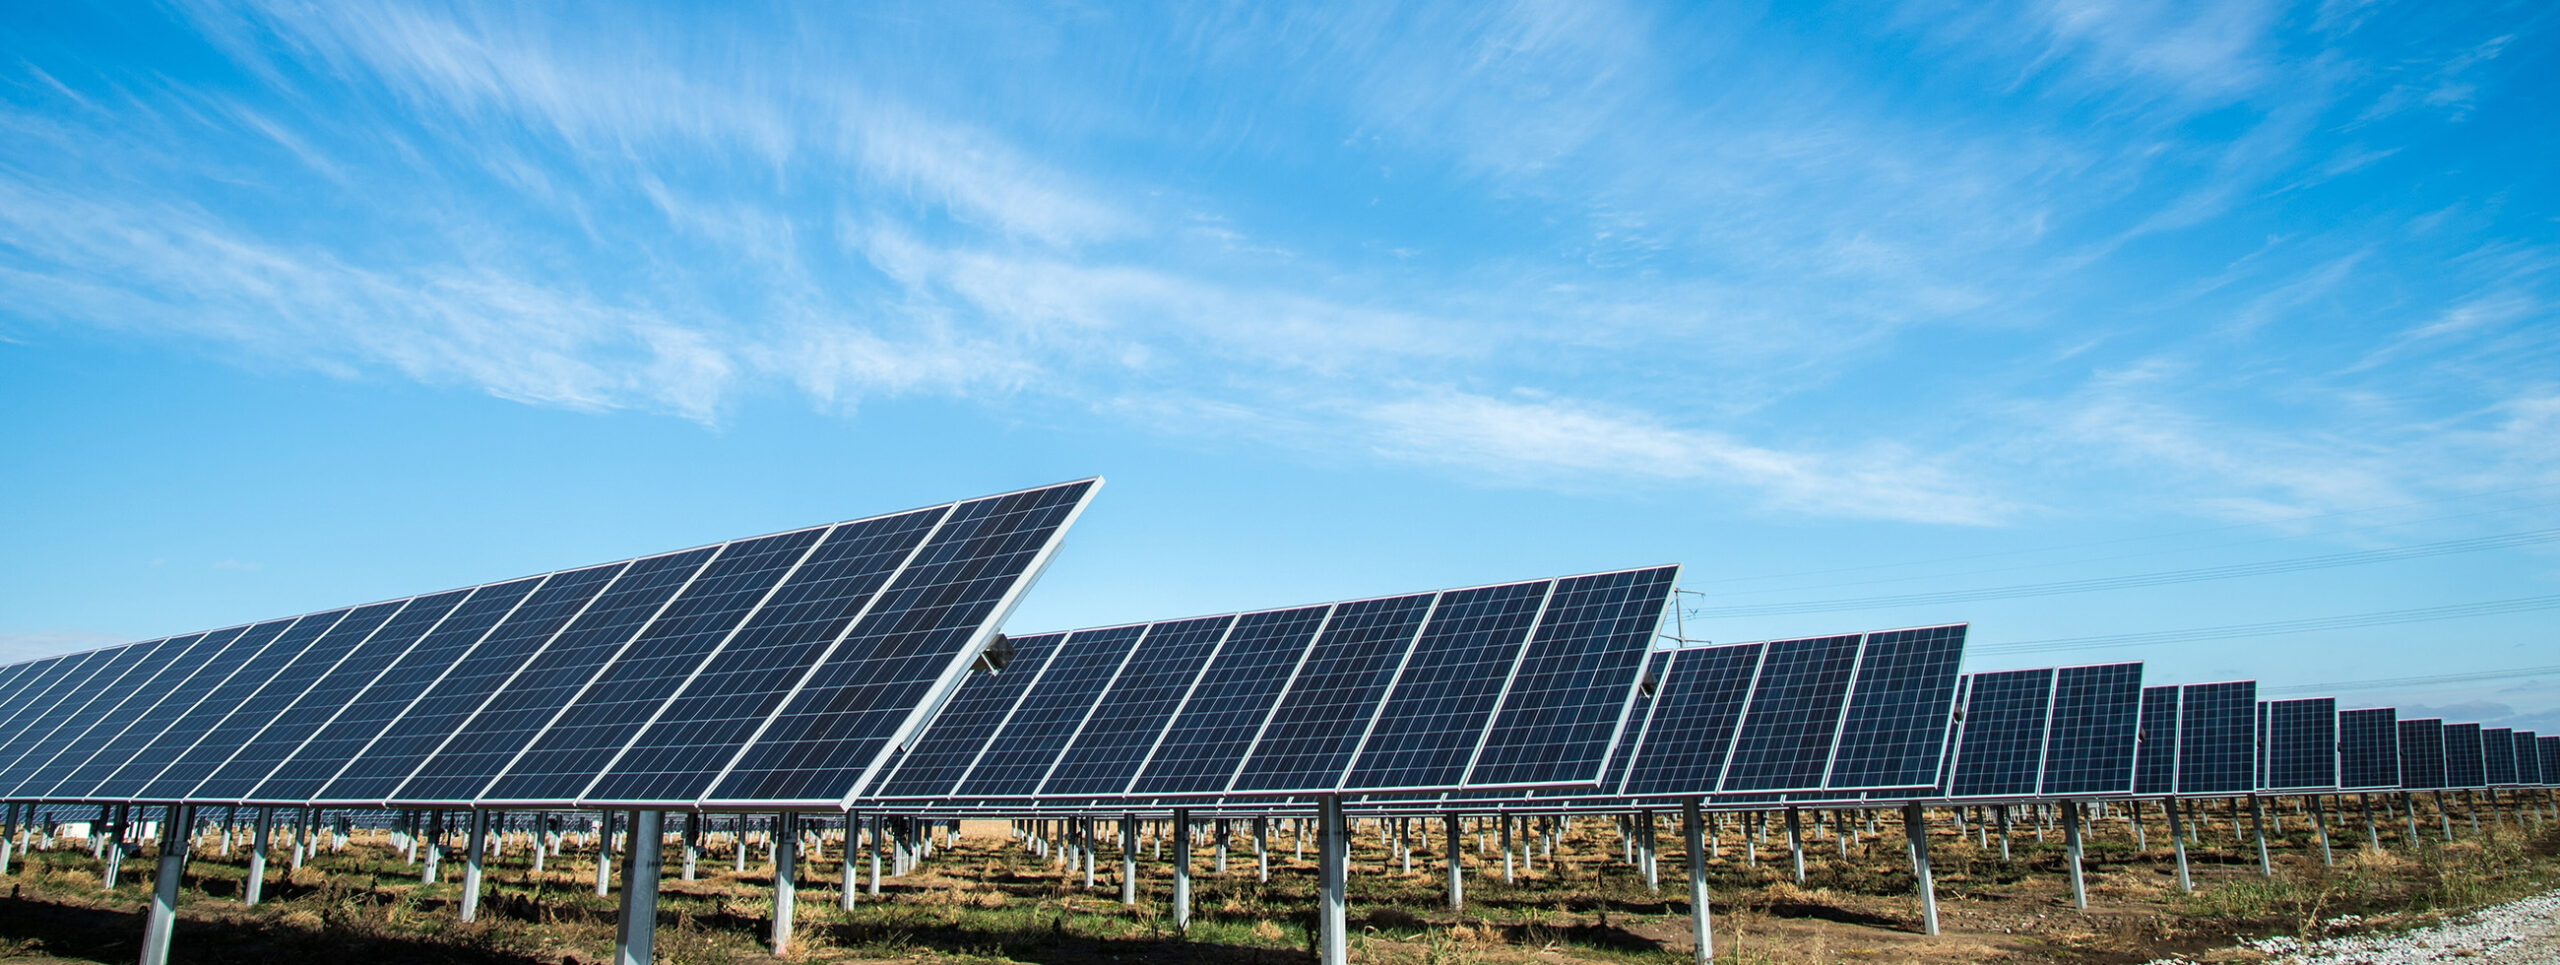 An array of solar panels in front of a blue sky